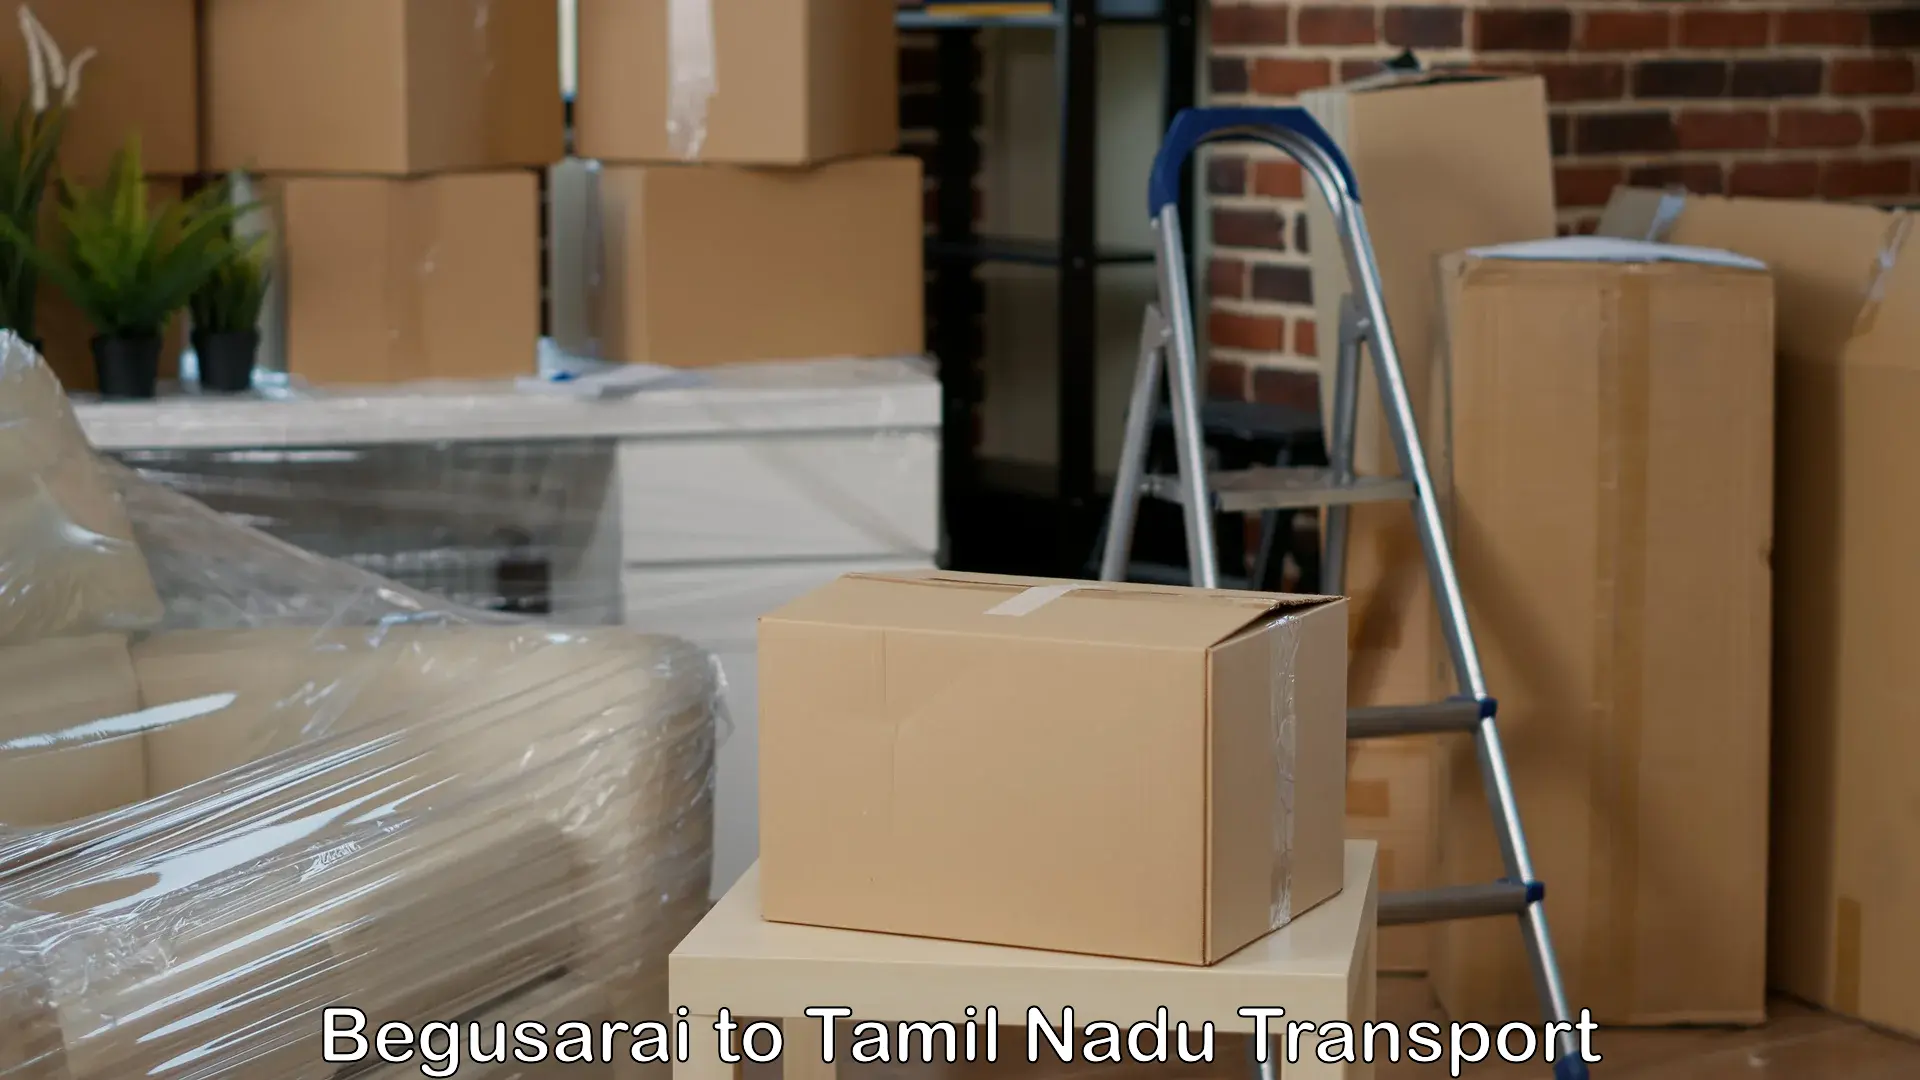 Domestic goods transportation services Begusarai to Vellore Institute of Technology